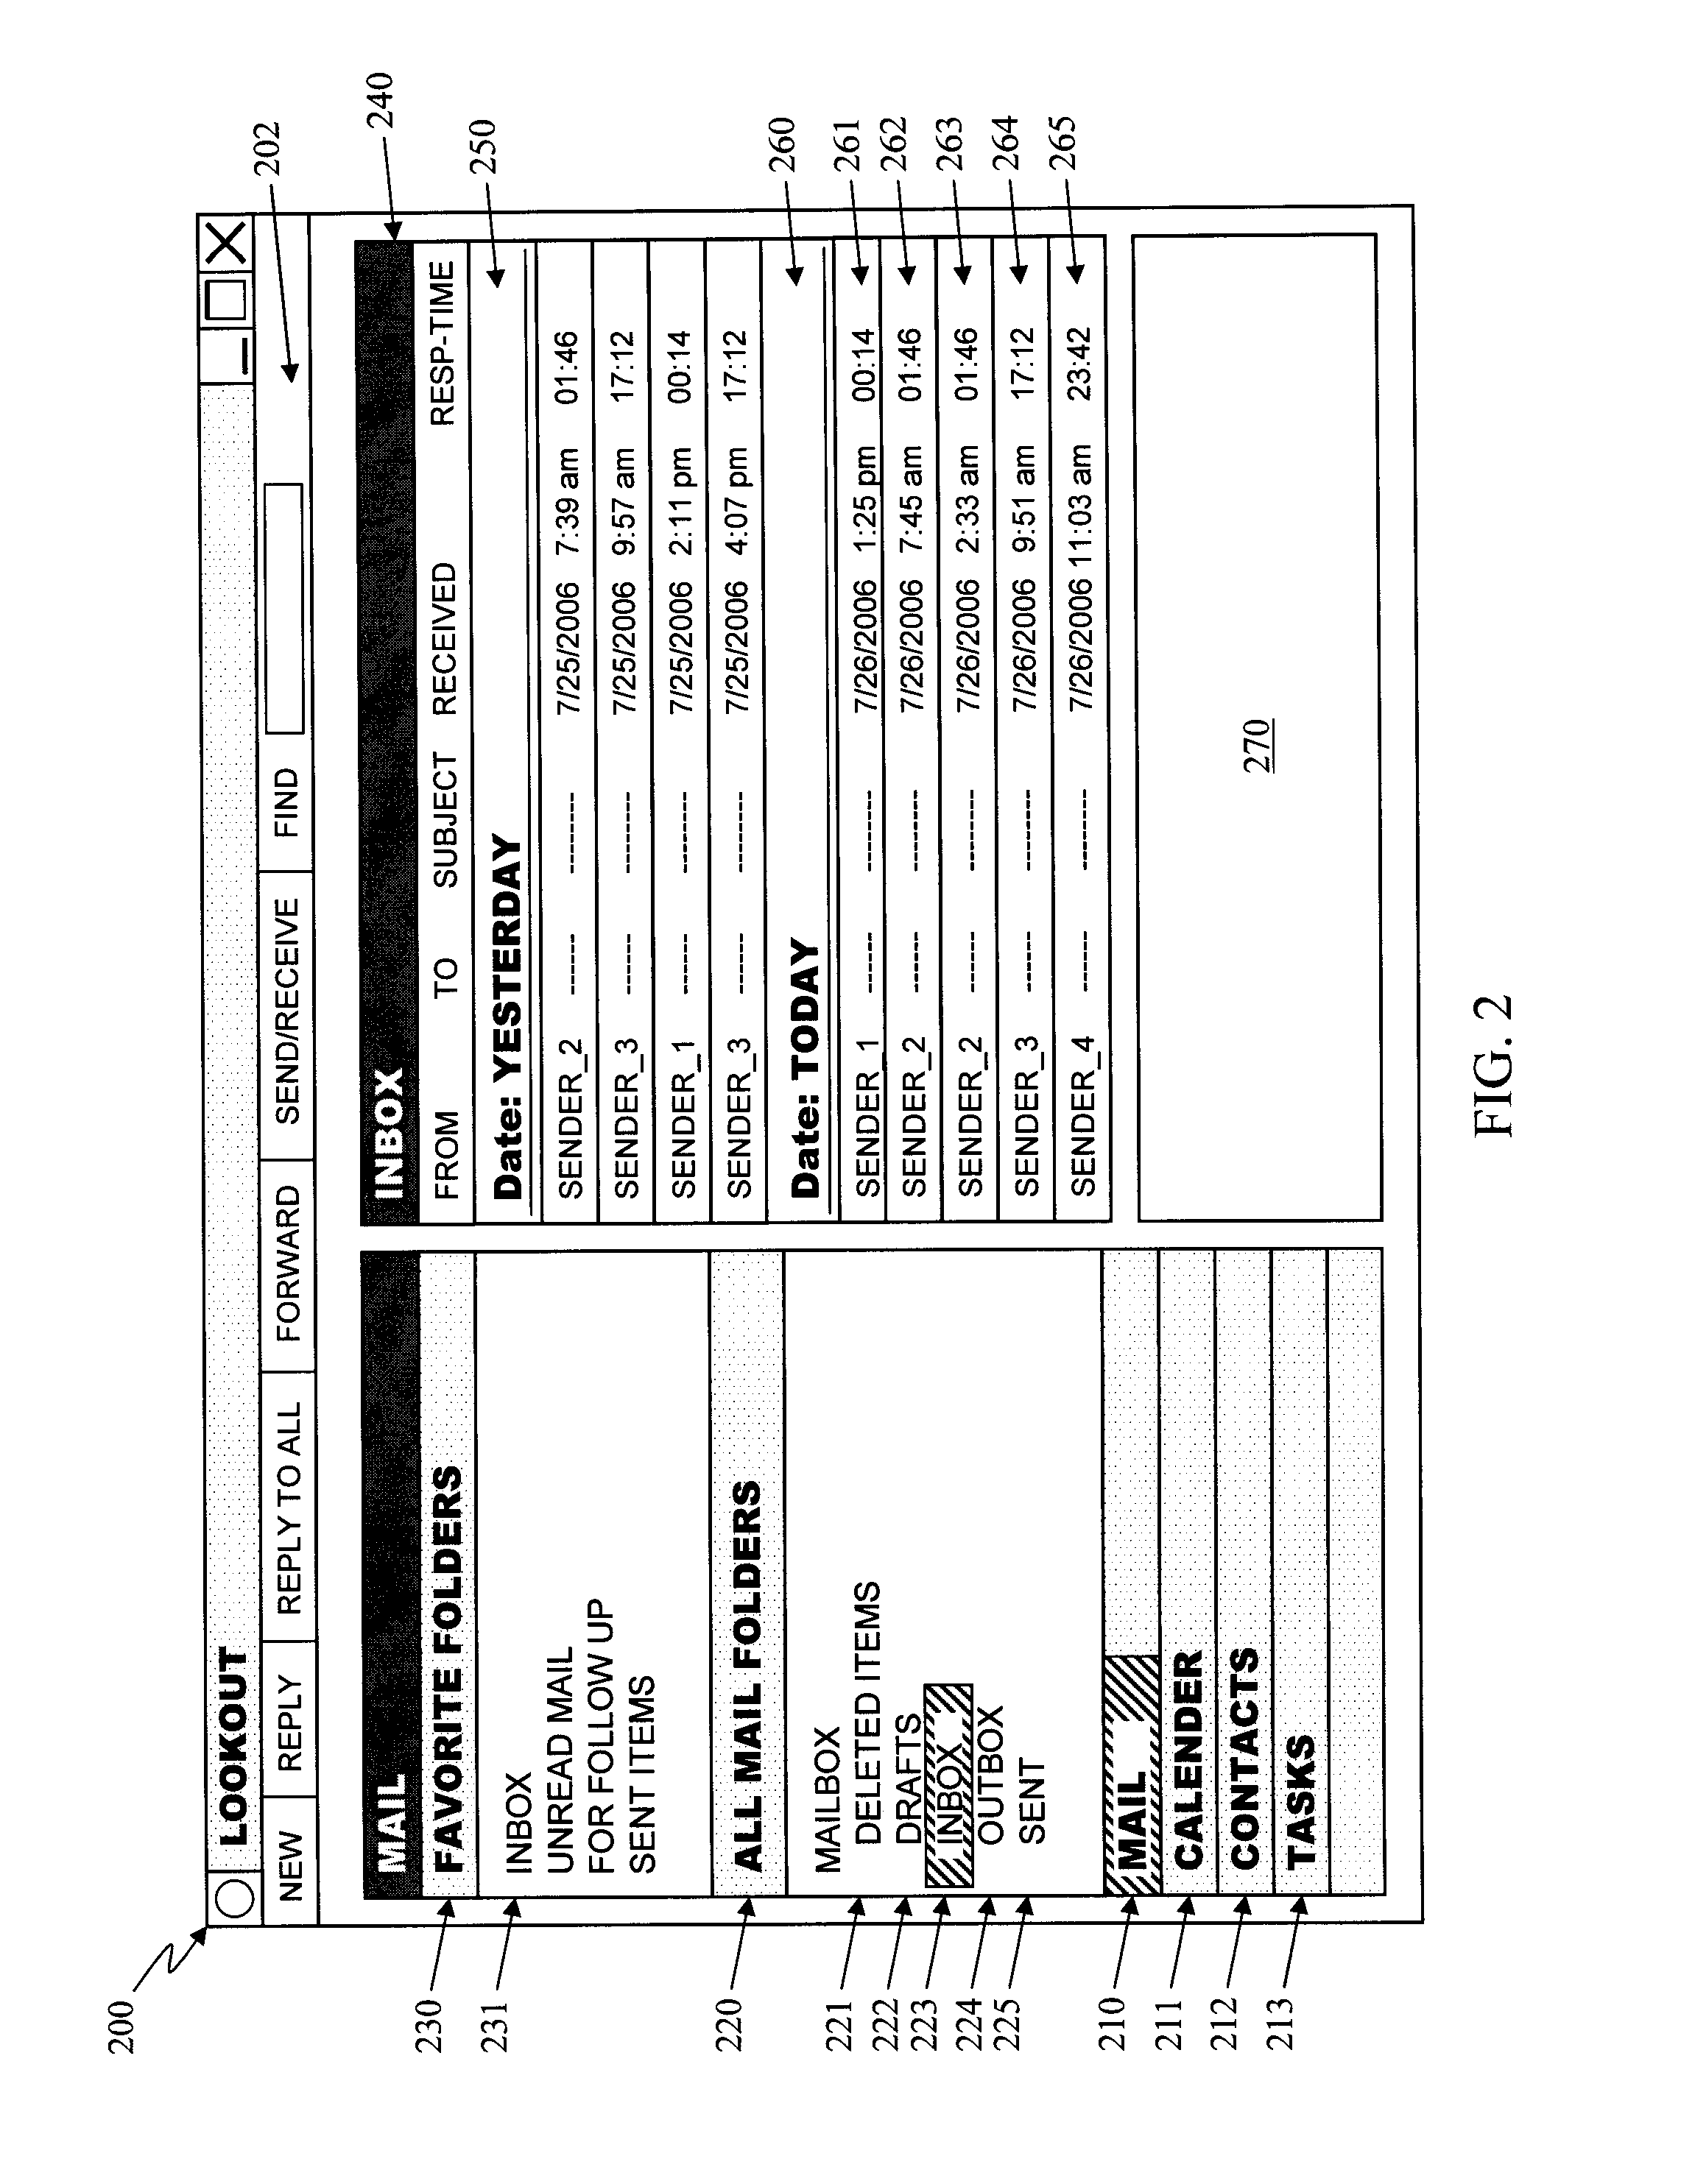 System and method for managing emails based on user response time